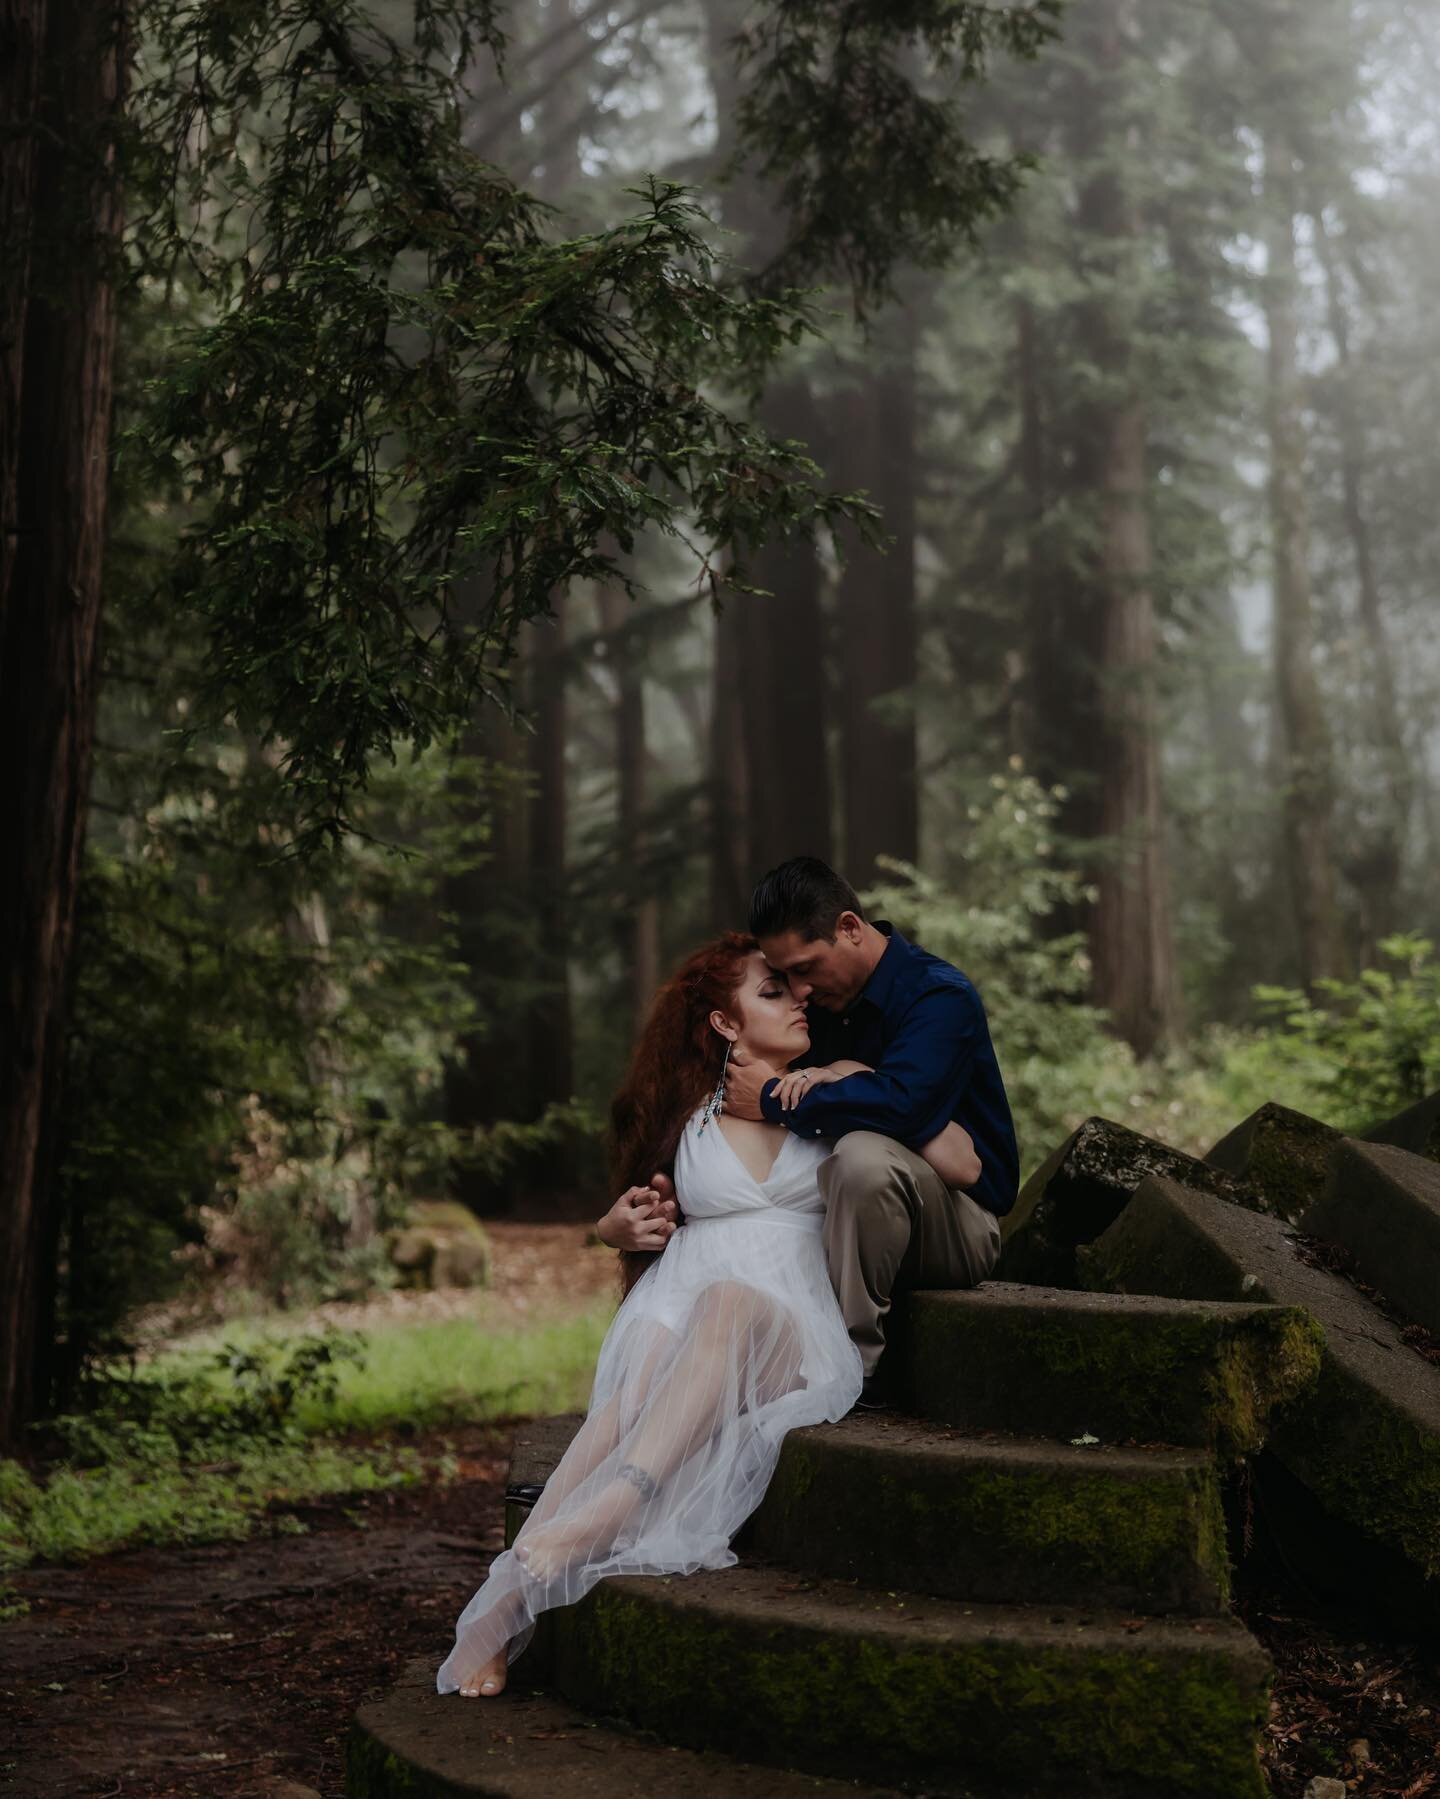 Clarissa and Peter in Mt.Madonna. We stumbled upon the perfect foggy day in the forest. I couldn&rsquo;t be more elated at our conversations and honored to photograph your wedding next month. #mtmadonna #santacruzweddingphotographer #santacruzelopeme